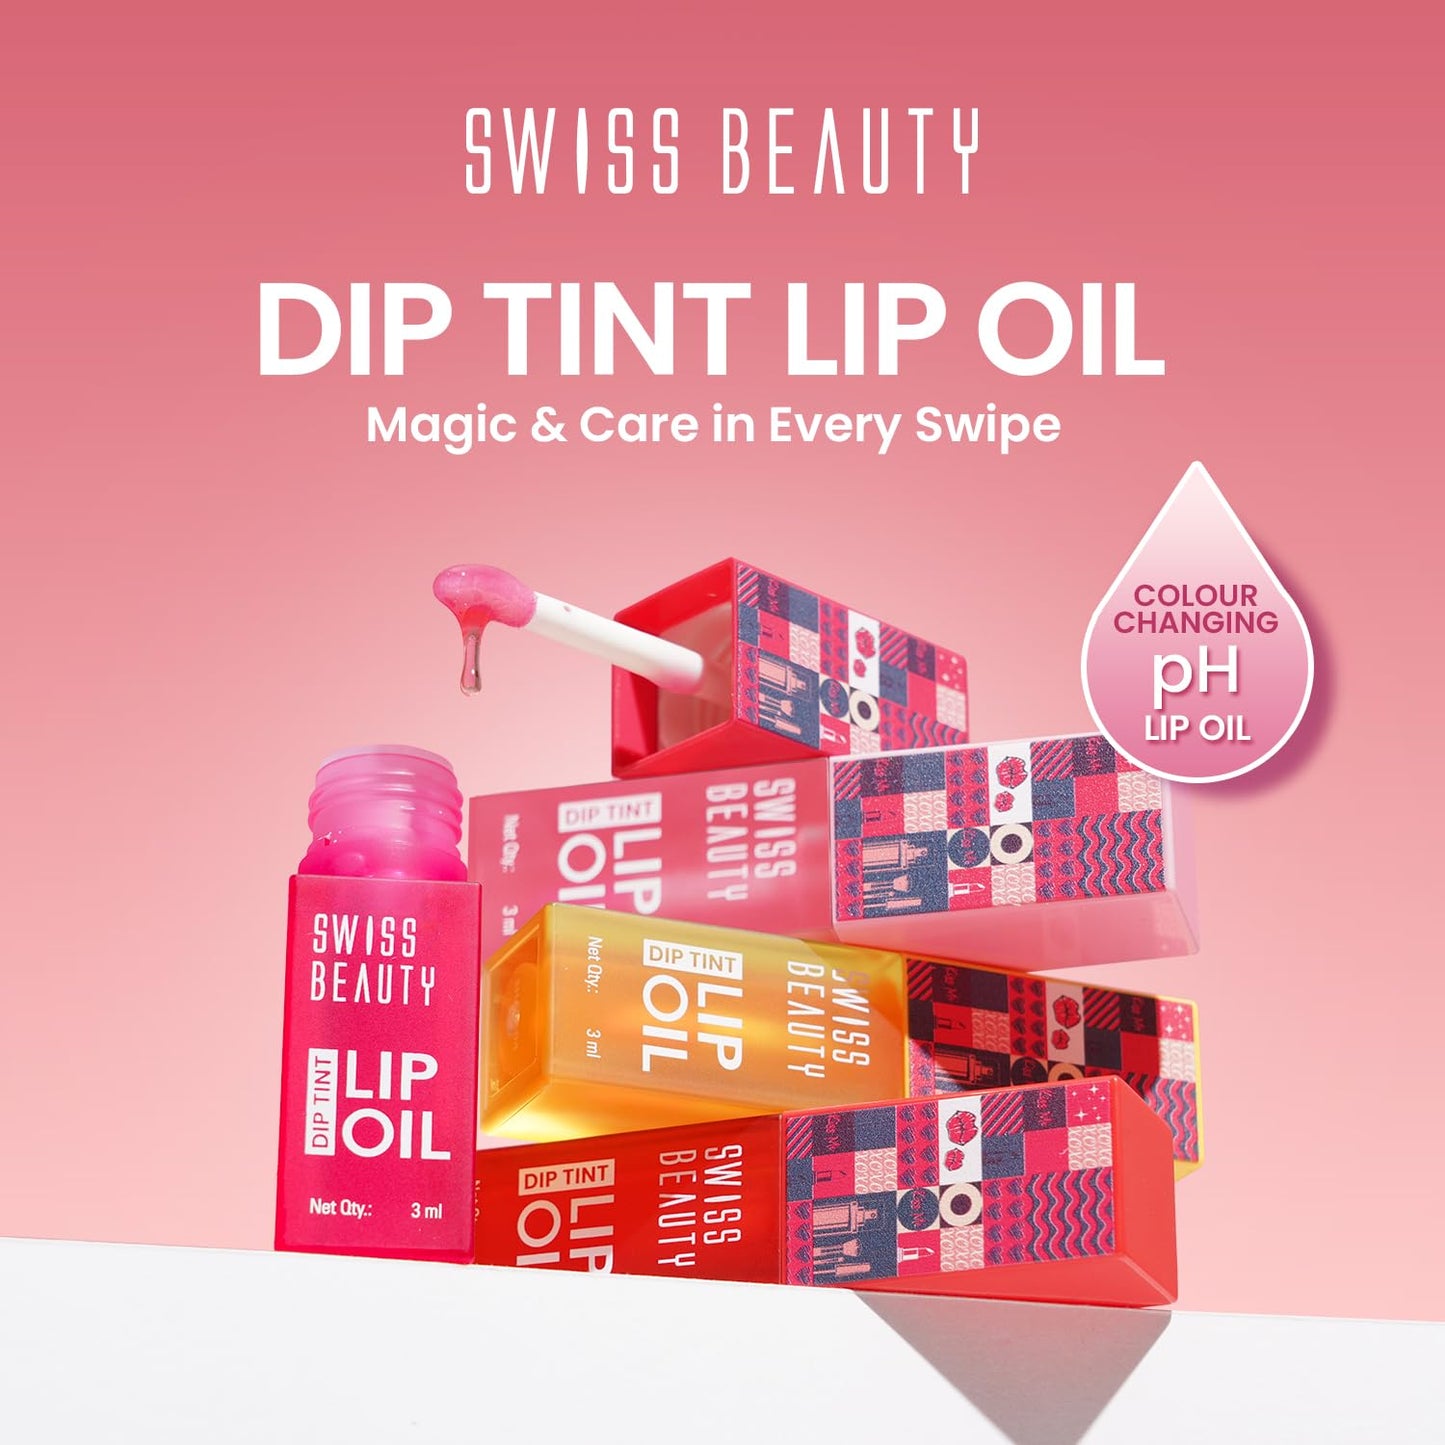 Swiss Beauty Dip Tint Colour Changing PH Lip Oil | With Vitamin E for Long-Lasting Nourishment and Hydration| Soft and Natural Pink Lips | Shade- Kiwi, 3ml